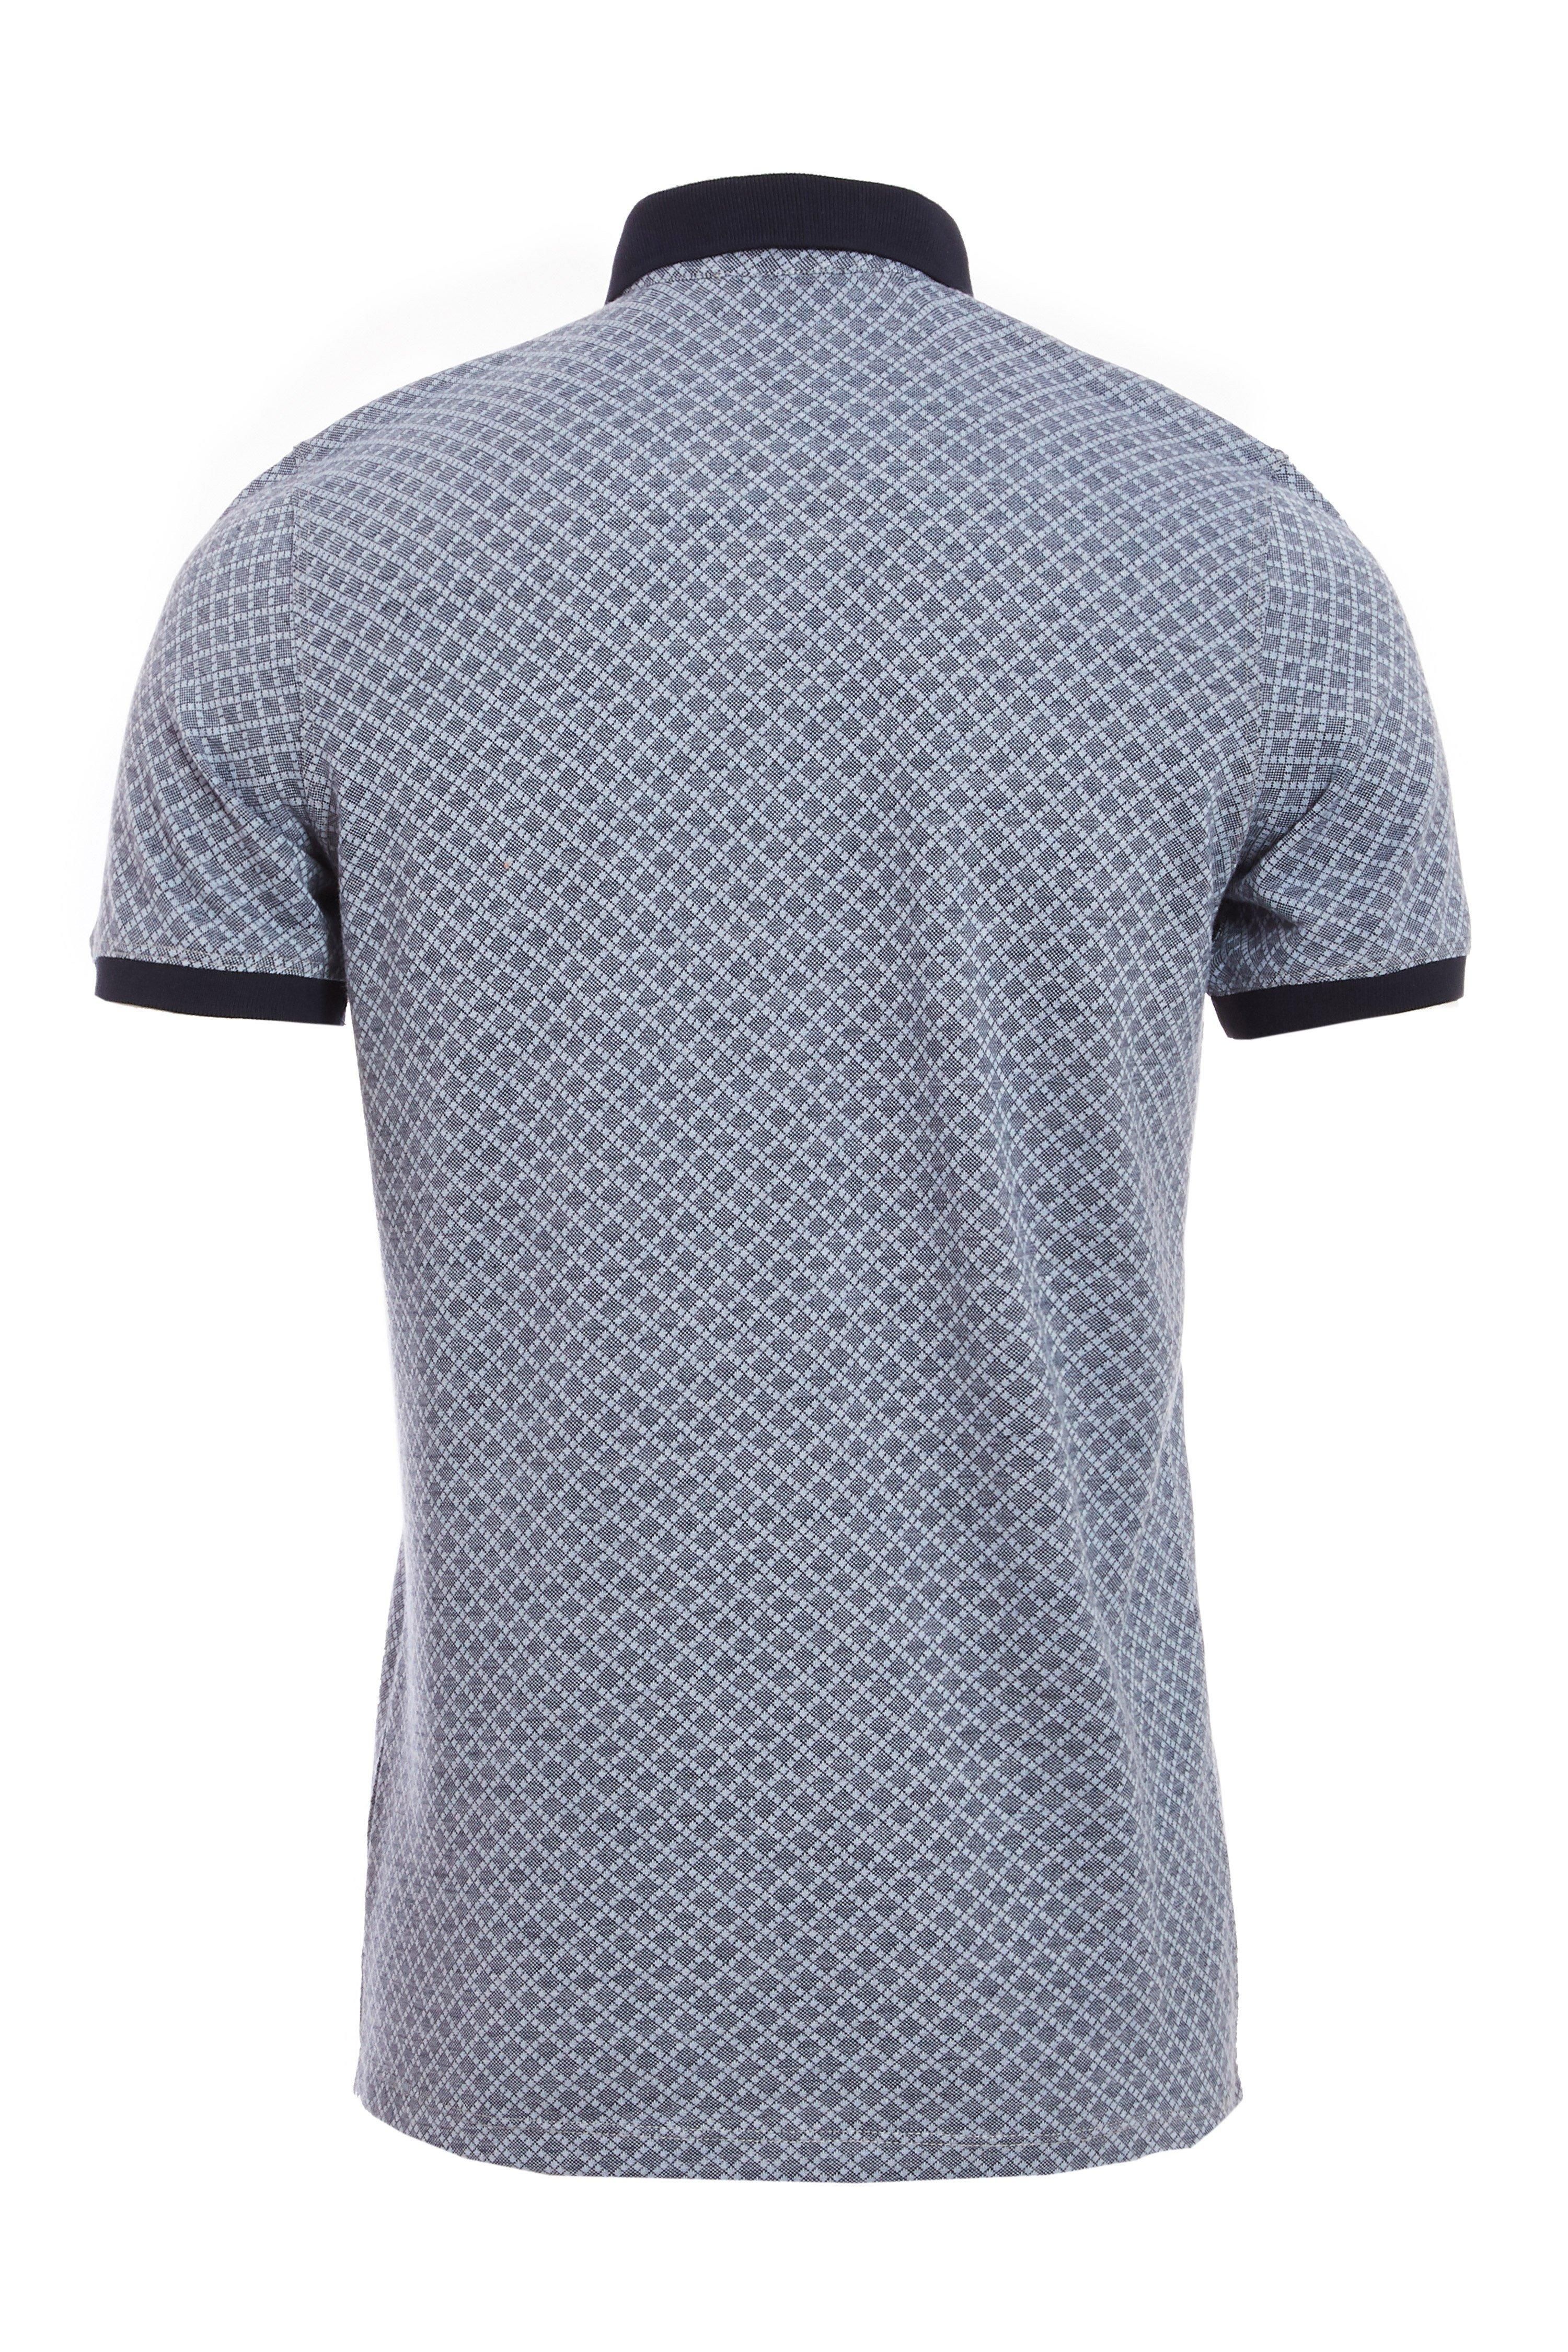 Printed Polo  	Diamond Pattern  	Short Sleeves  	2 Button Fastening  	Contrast Collar and Piping